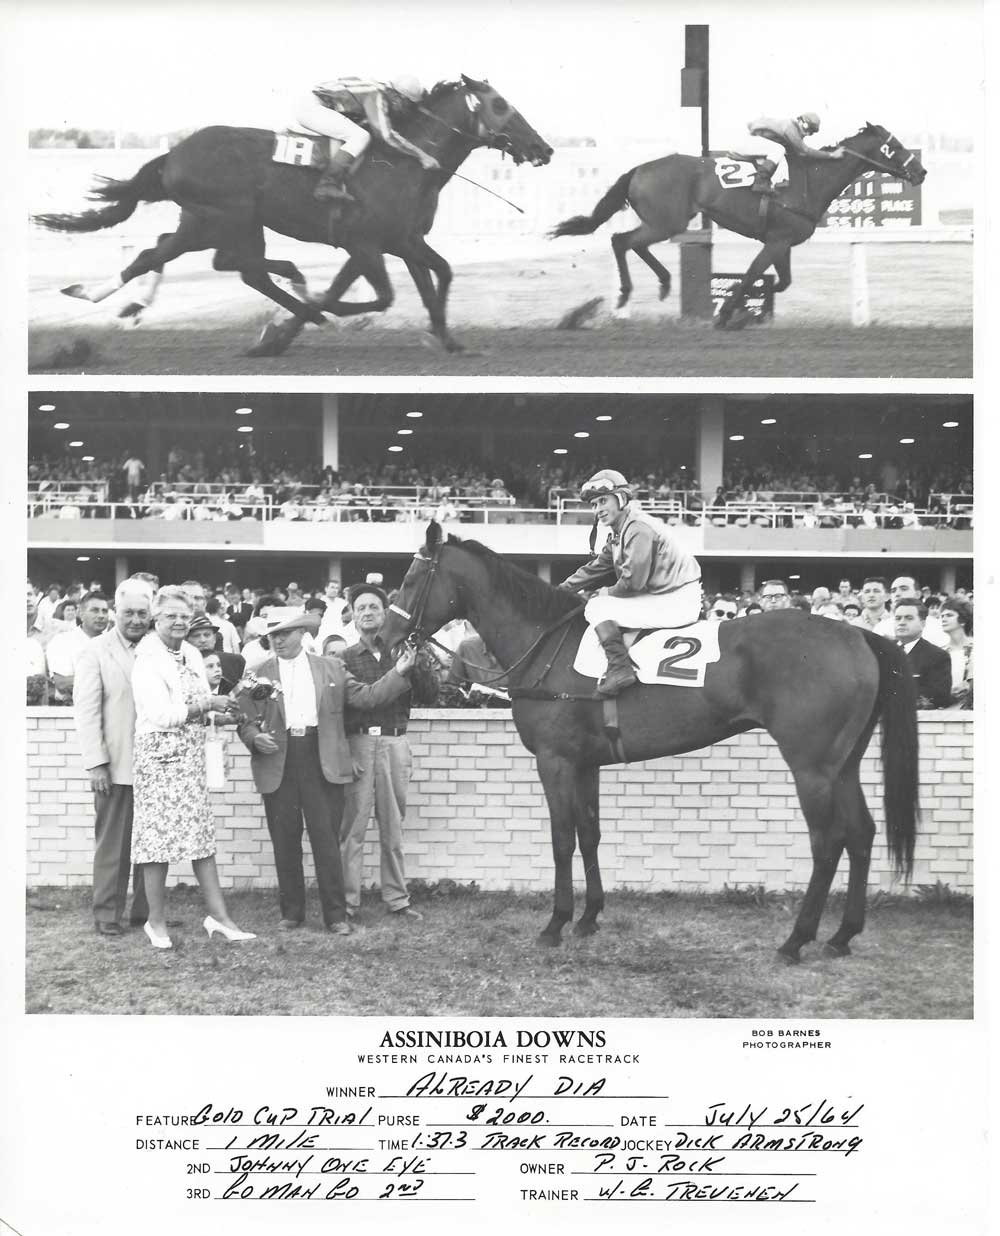 Dick Armstrong sets new track record for a mile at ASD aboard Already Dia. July 25, 1964.